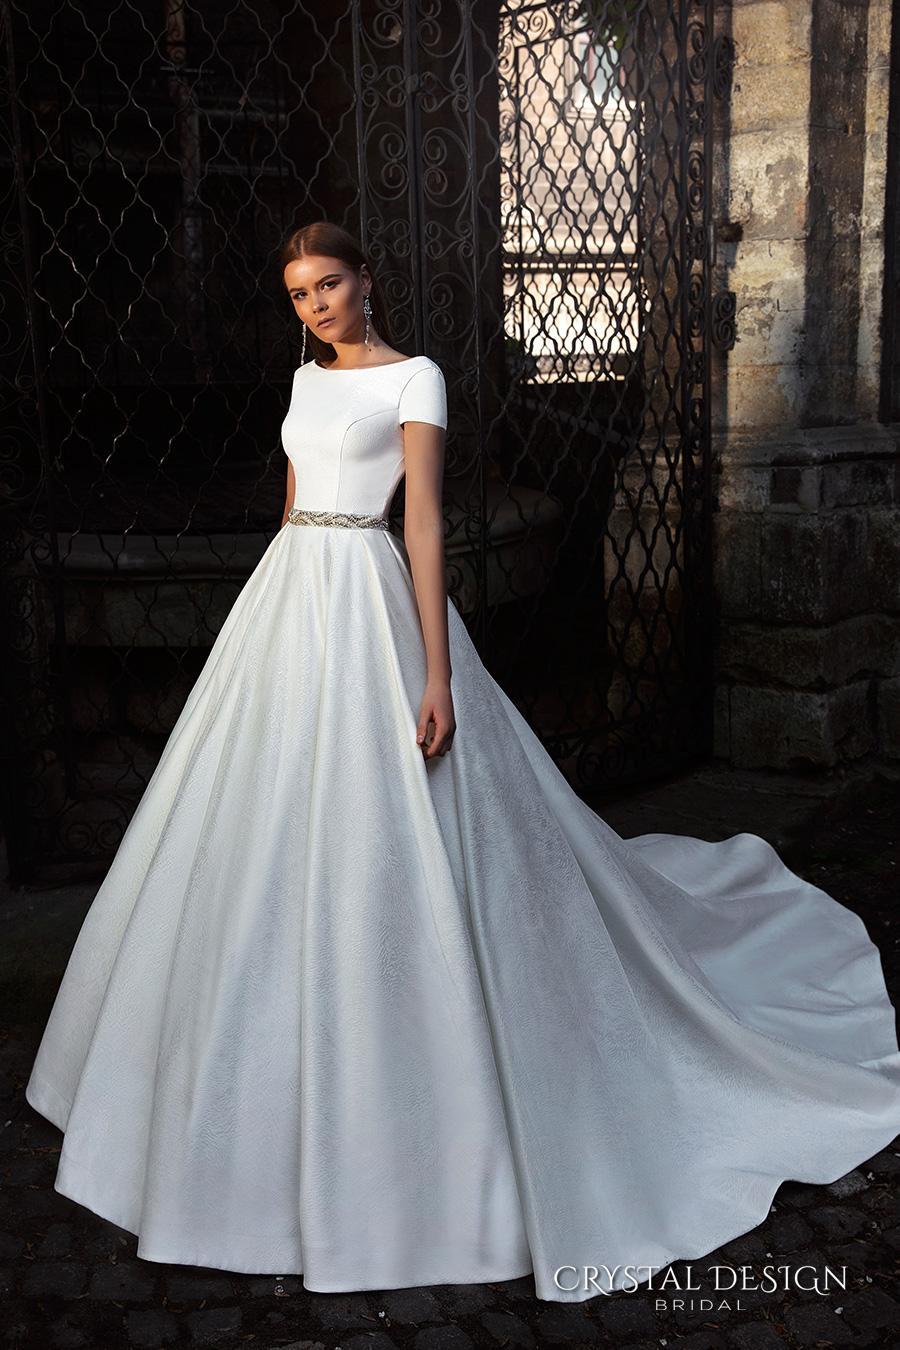 Hochzeit - New Arrival Short Sleeve Backless Crystal Design 2016 Wedding Dresses Beaded Sash Bridal Ball Gowns Wedding Dress Online with $116.84/Piece on Hjklp88's Store 